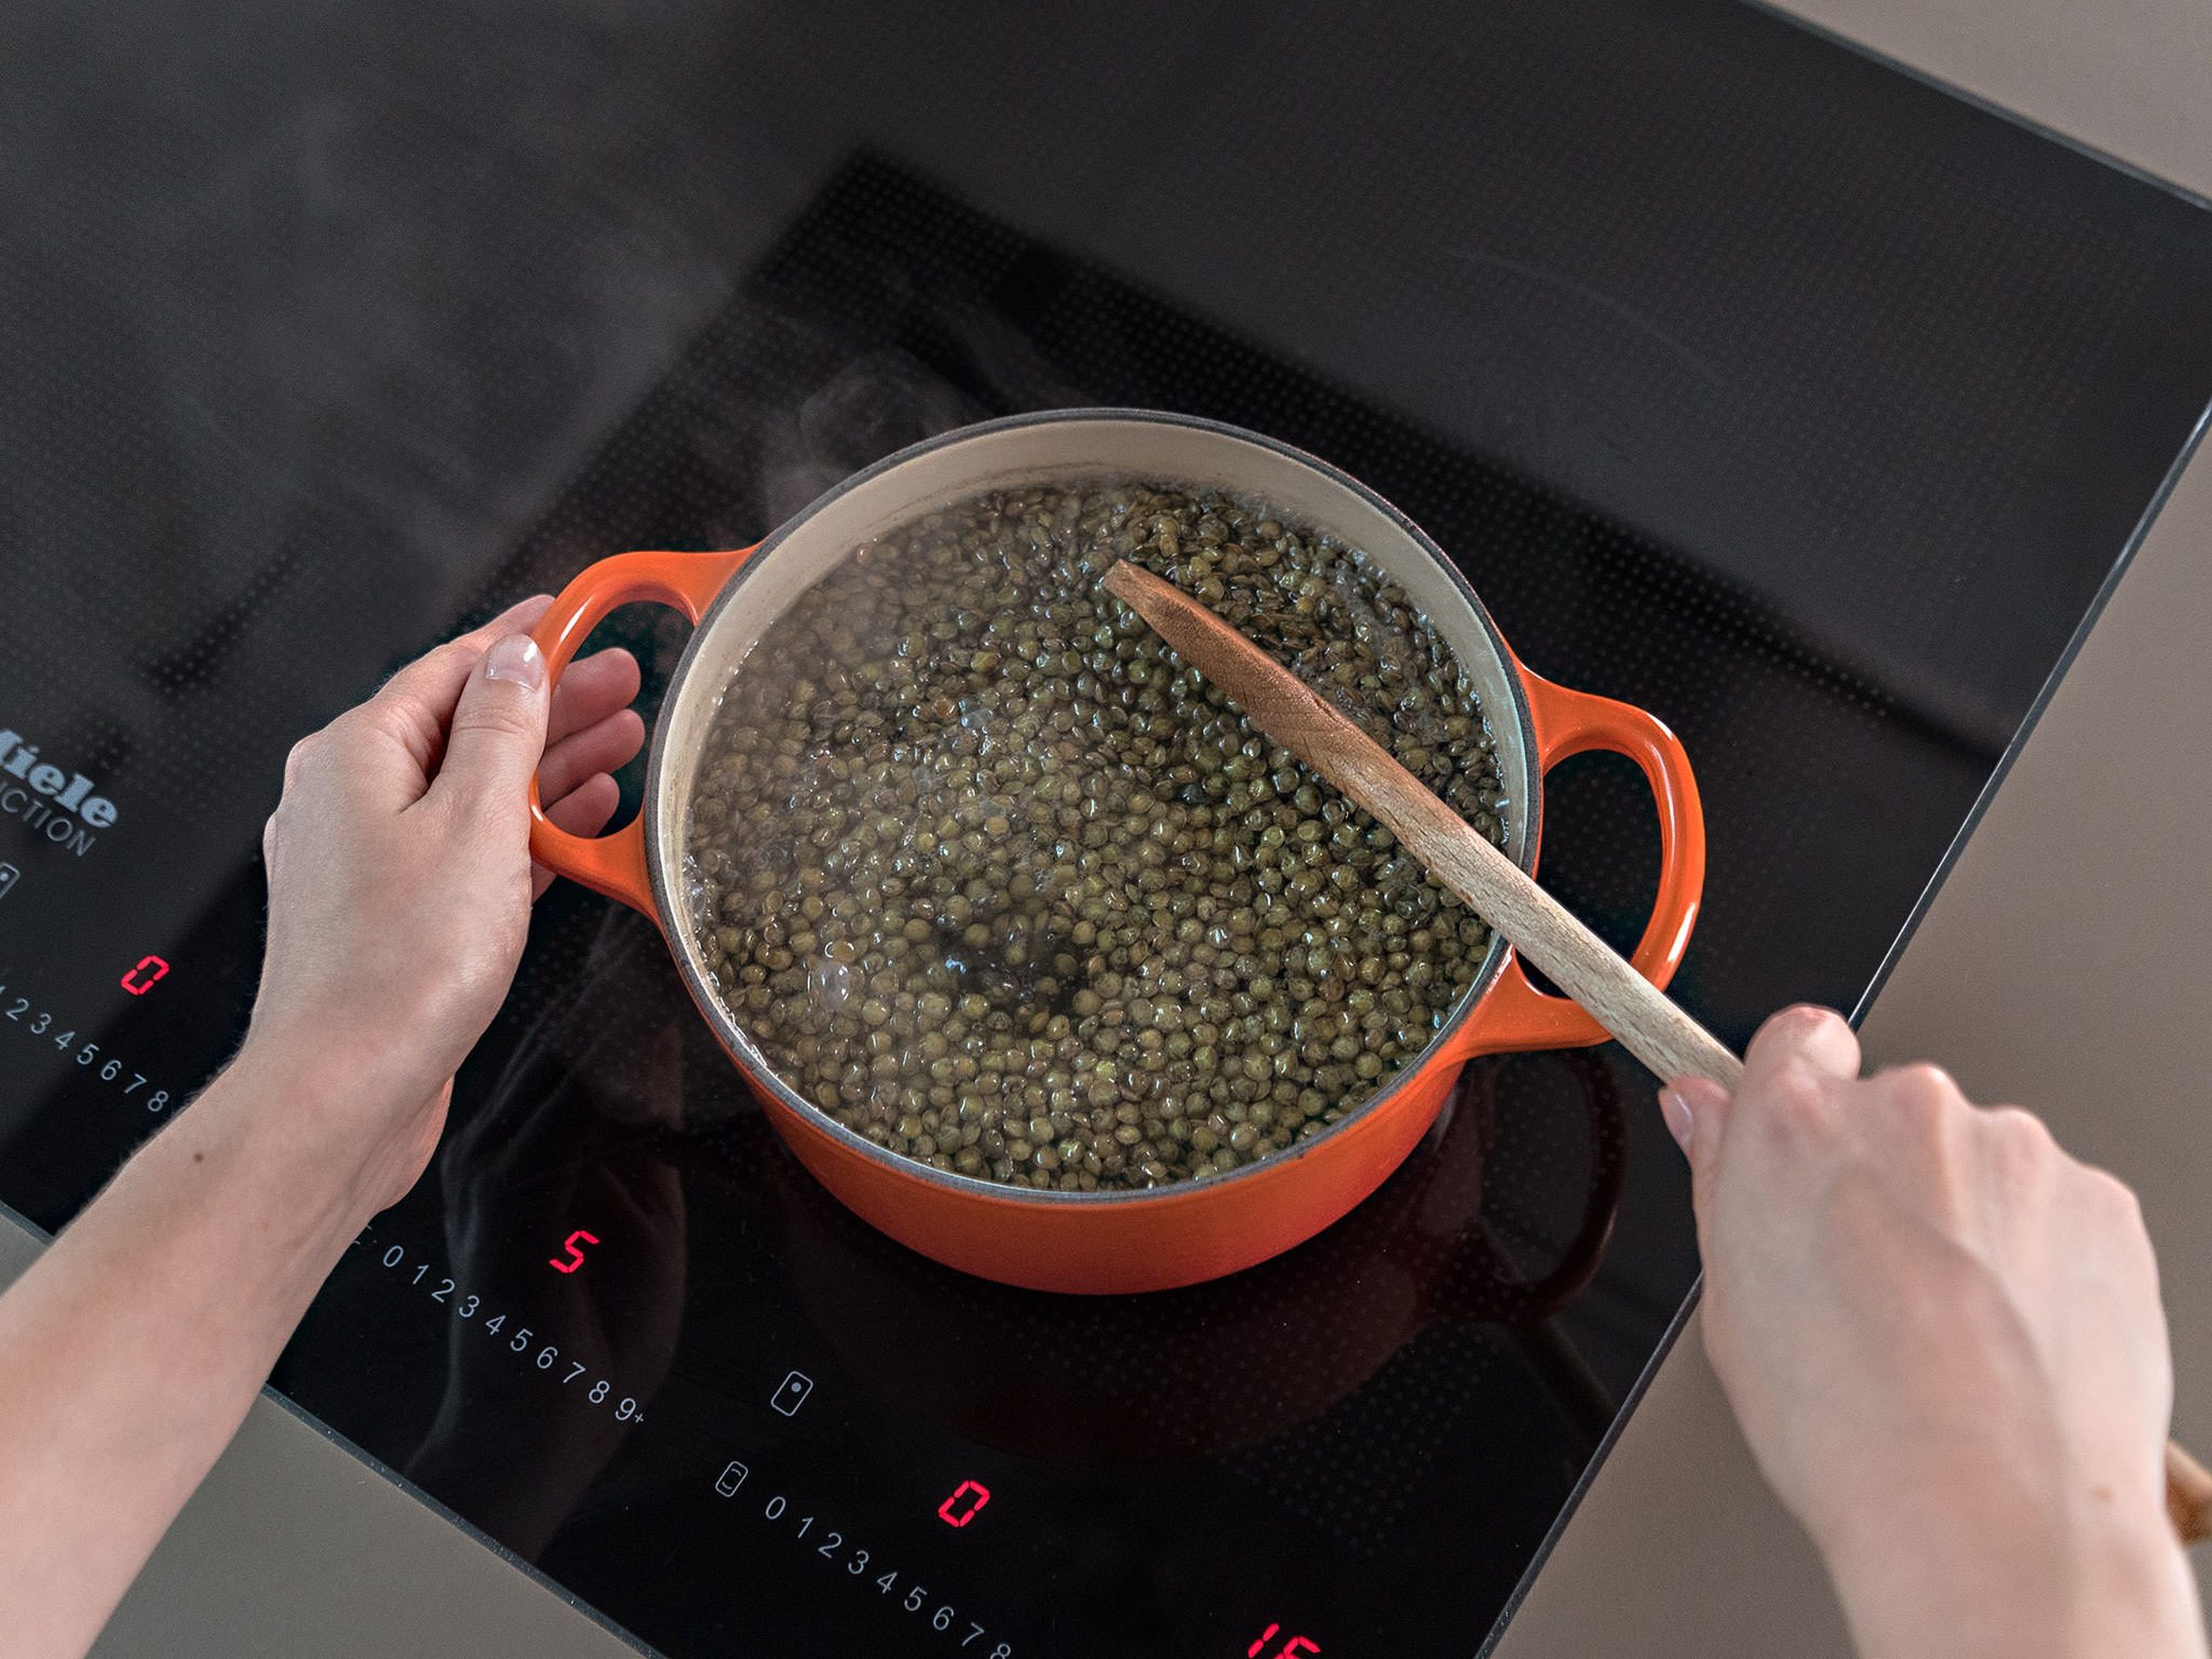 Add lentils to a large saucepan, cover with water, add salt, and bring to a boil. Reduce heat and leave to simmer over medium heat for approx. 20 min. until tender. Remove from heat, drain, and set aside.